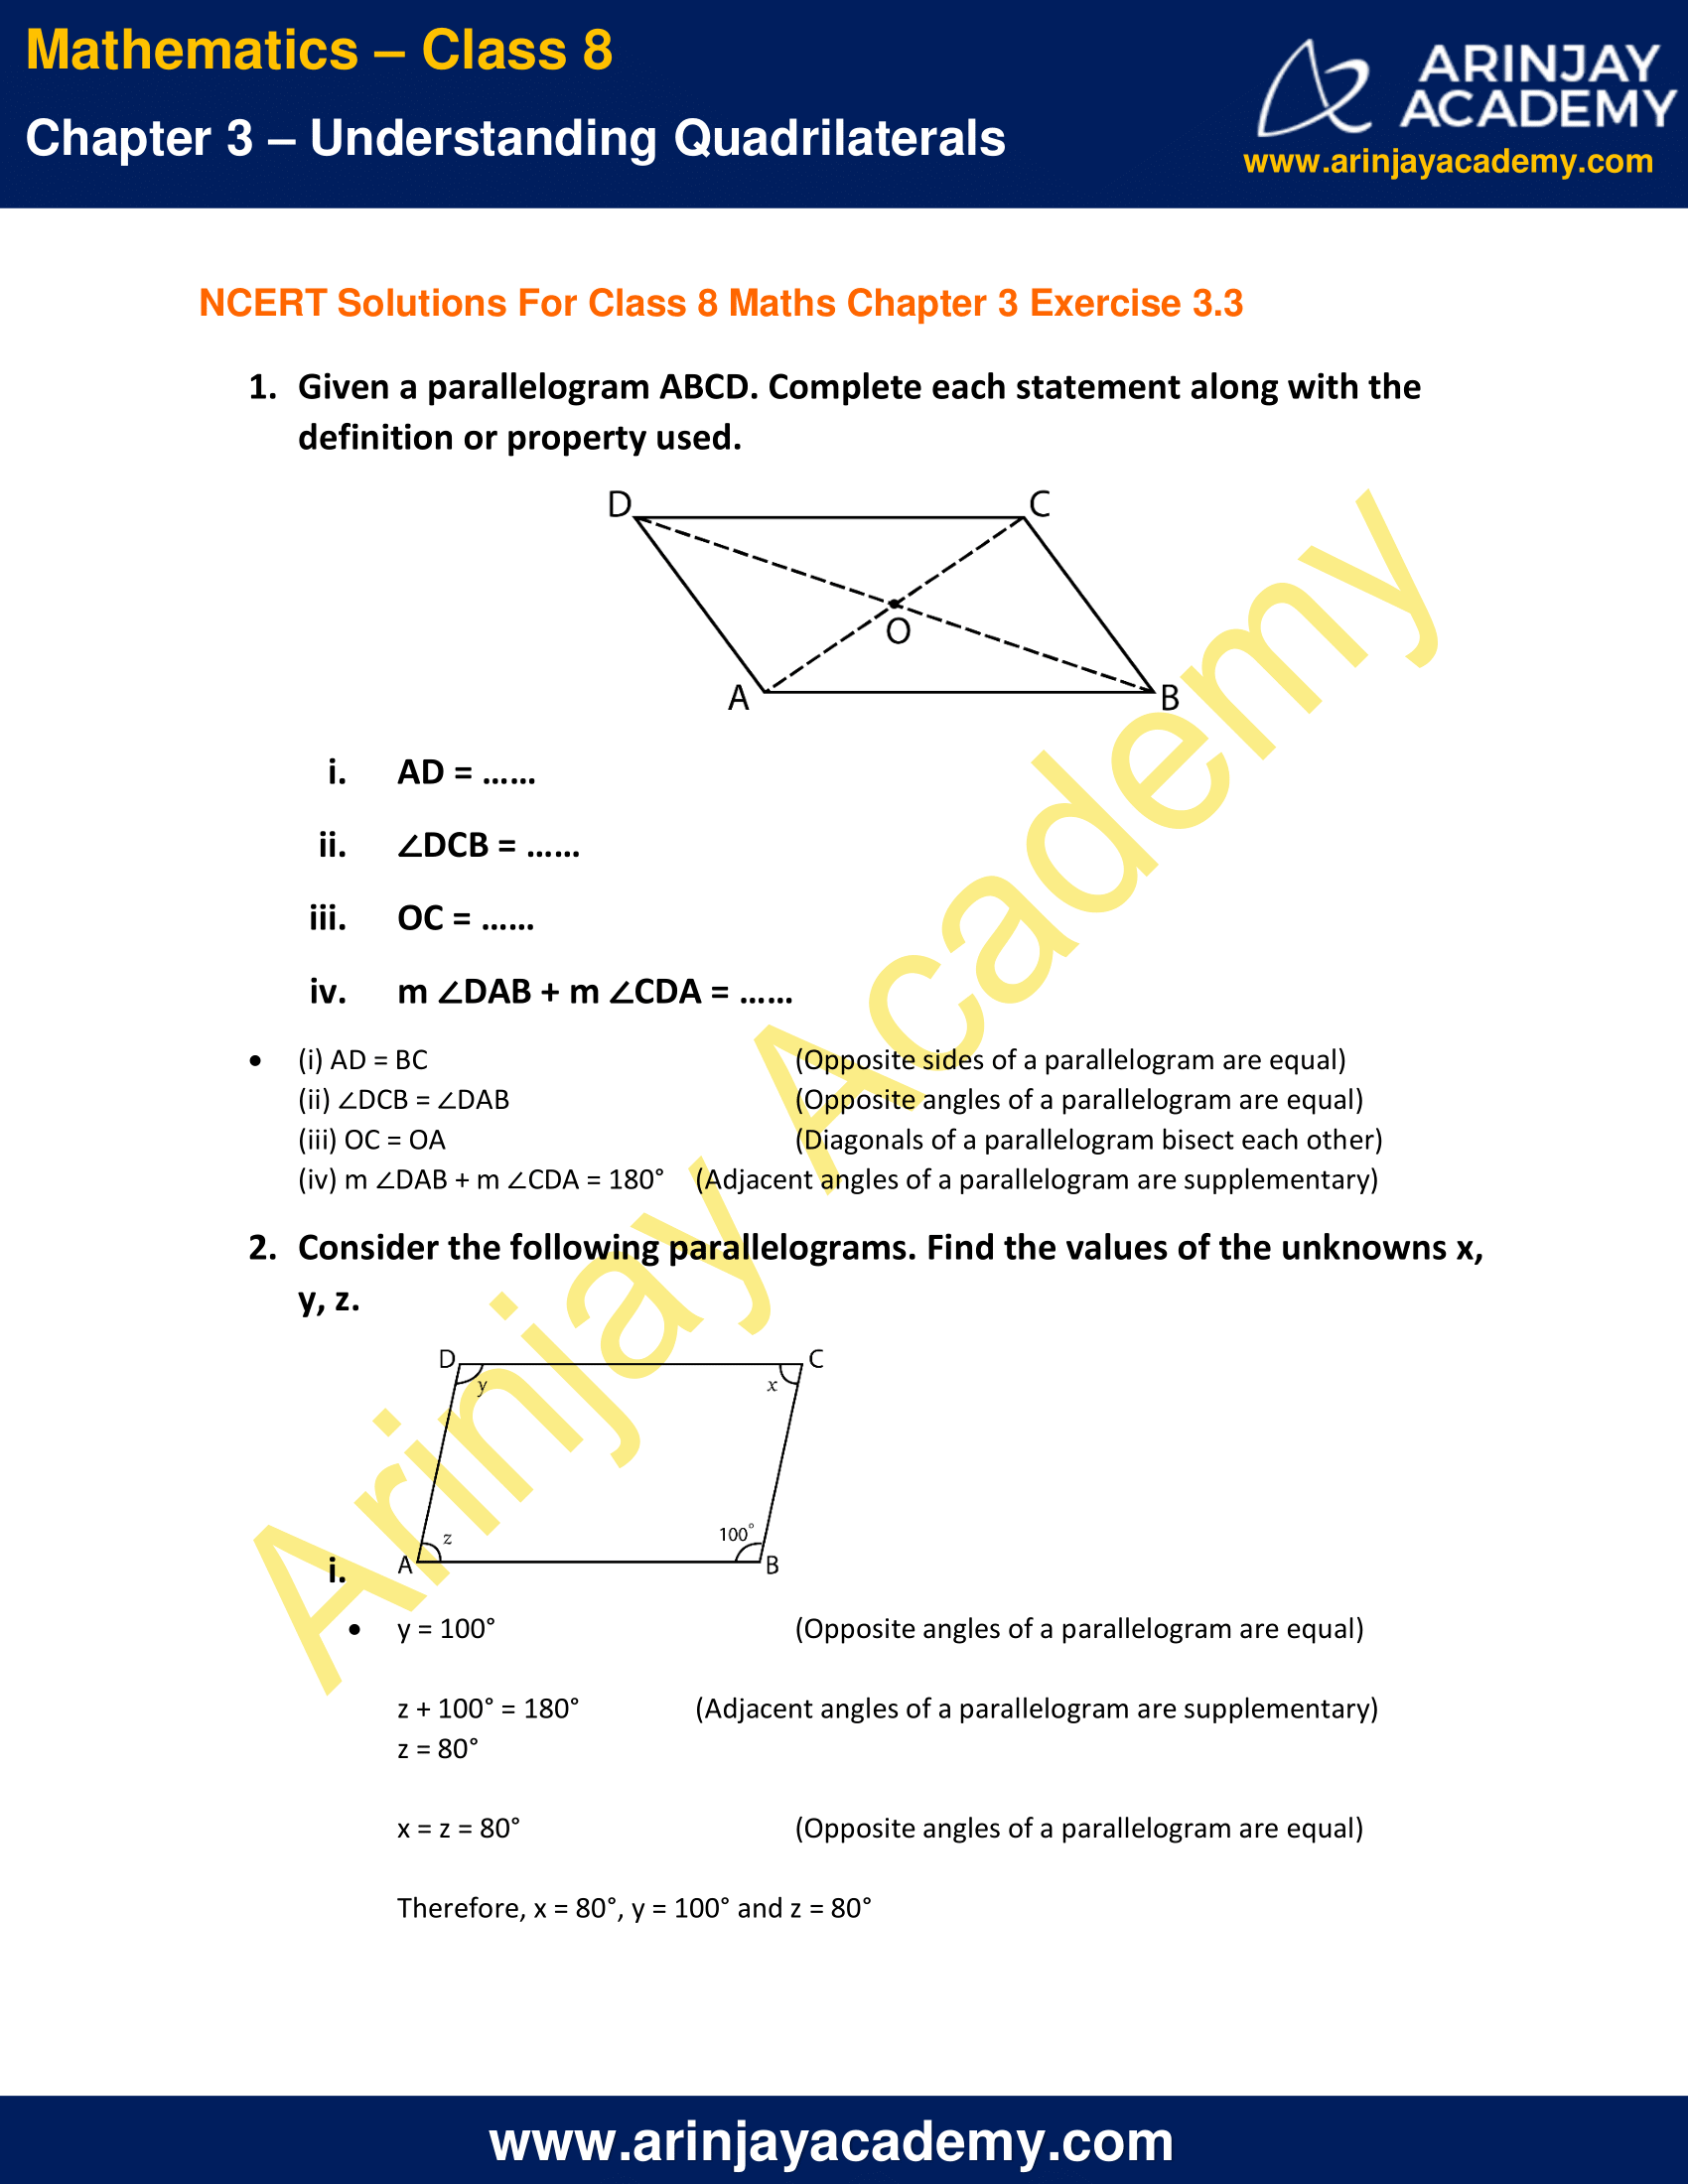 NCERT Solutions for Class 8 Maths Chapter 3 Exercise 3.3 image 1